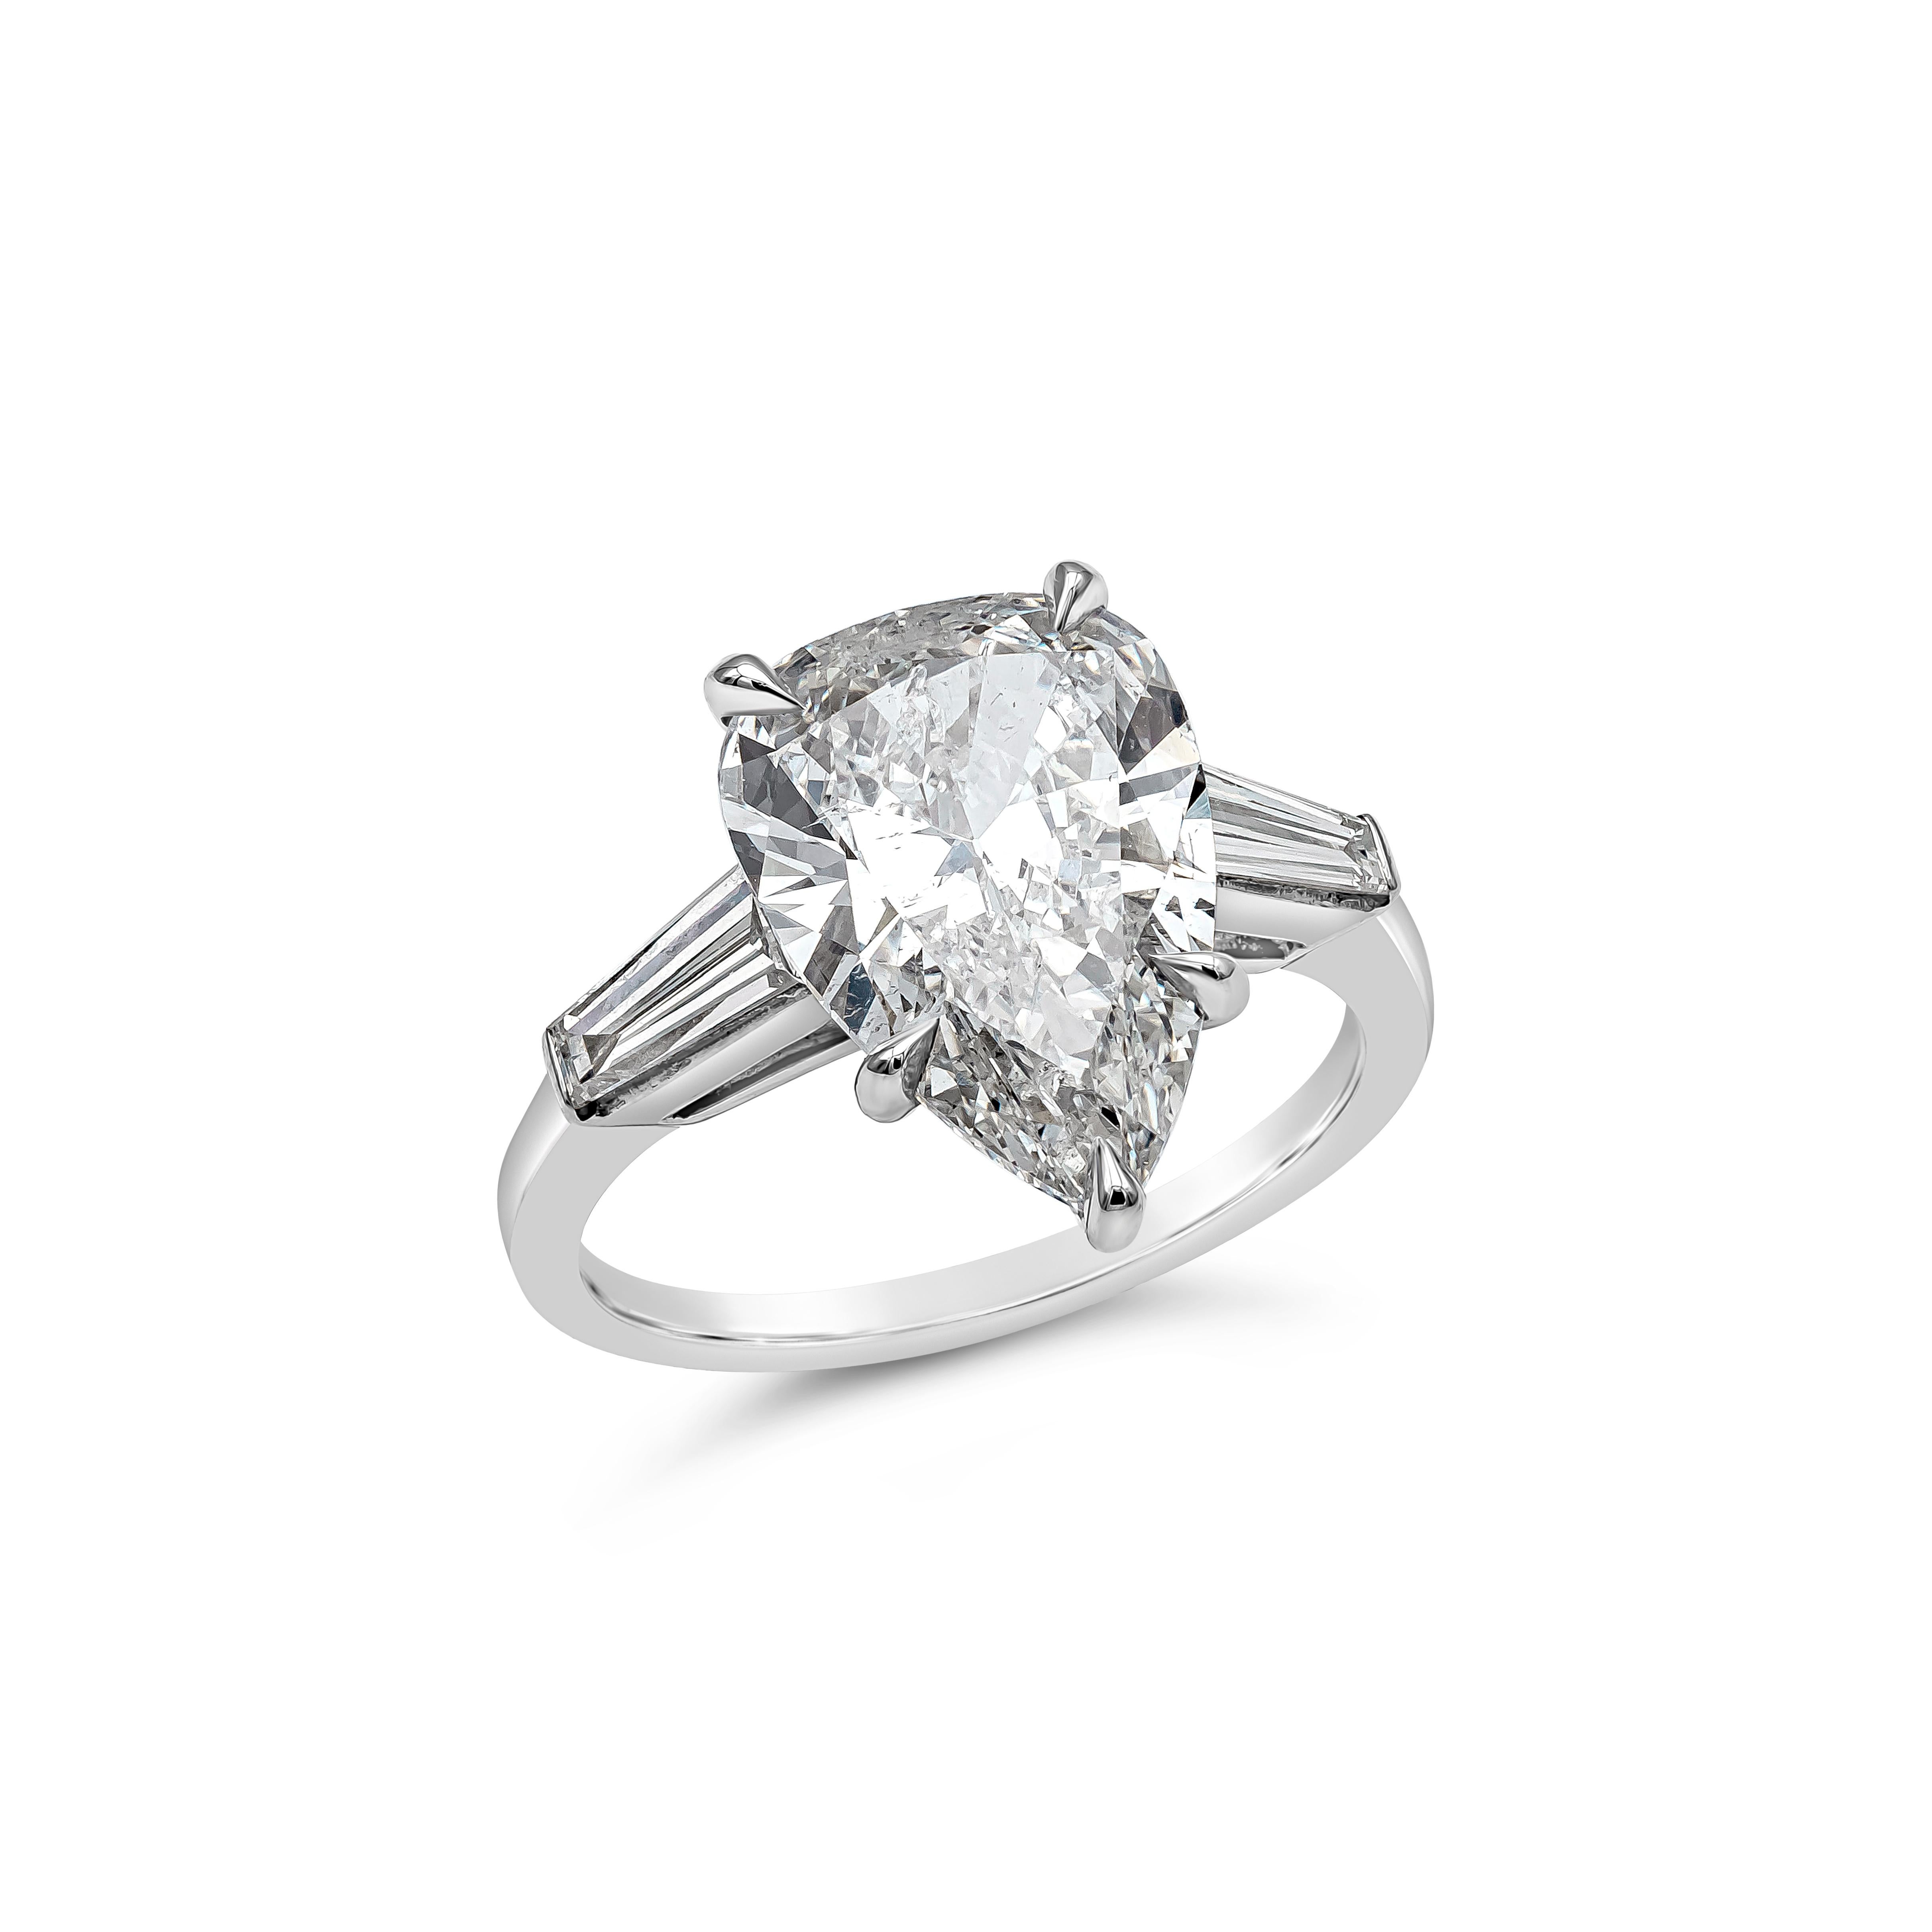  A classic three-stone engagement ring showcasing a 4.04 carat pear shape diamond certified by GIA as I color, SI2 clarity, flanked by baguette shape diamonds on either side. Accent diamonds weigh 0.60 carats and are approximately H color, VS